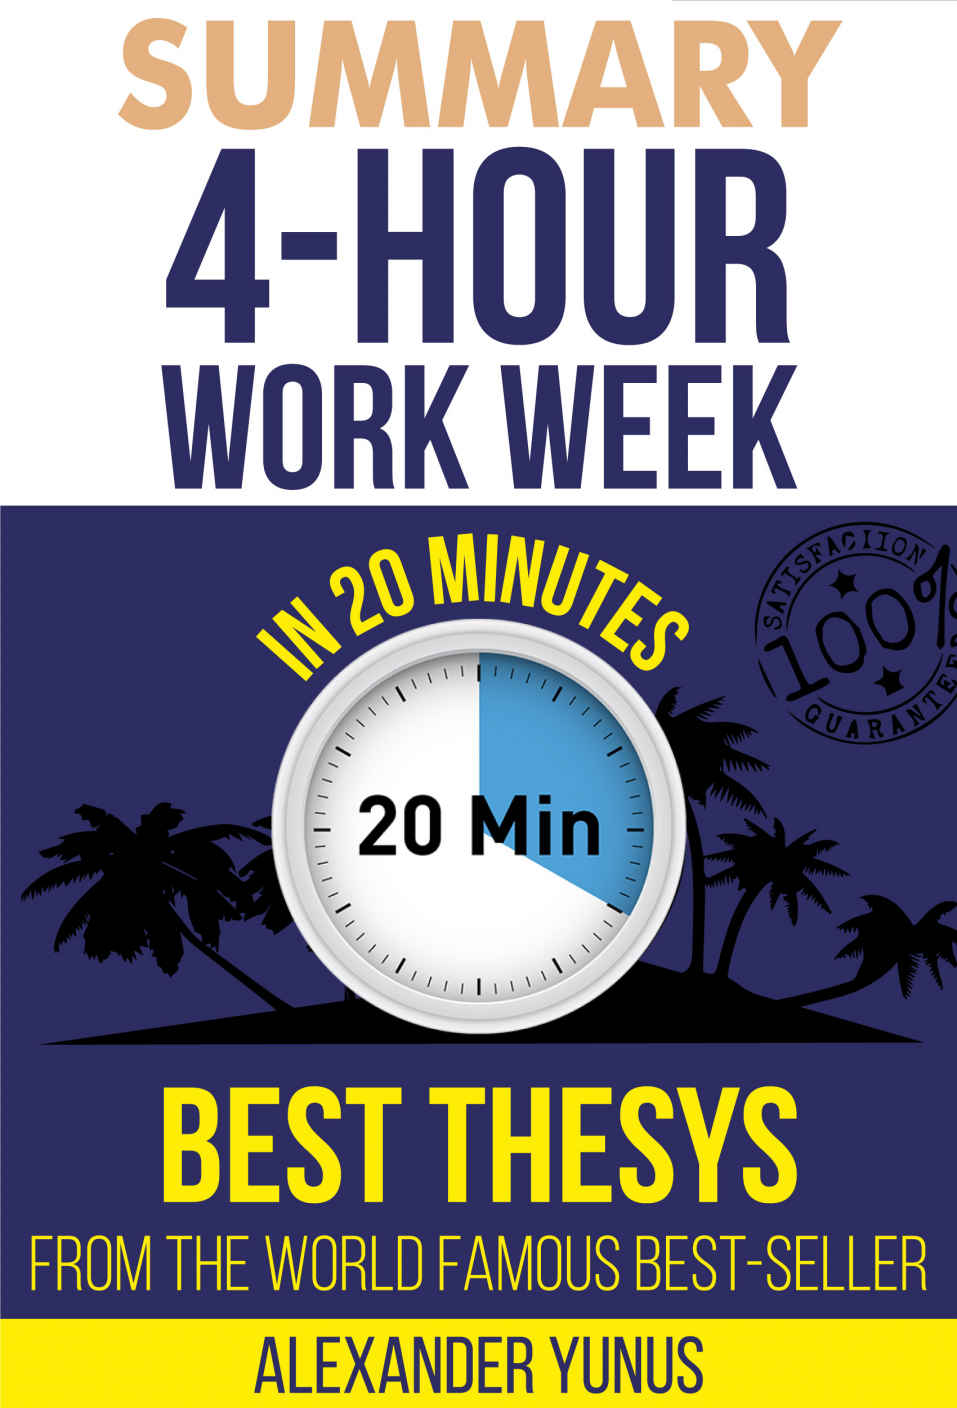 Summary: The 4-hour Workweek: Best Summary Of World Famous Best-Seller For Entrepreneurs in 20 Minutes (Updated and Revised)(The 4 Hour Work Week - Book ... - Passive Income) (The 4 Hour Workweek 1)